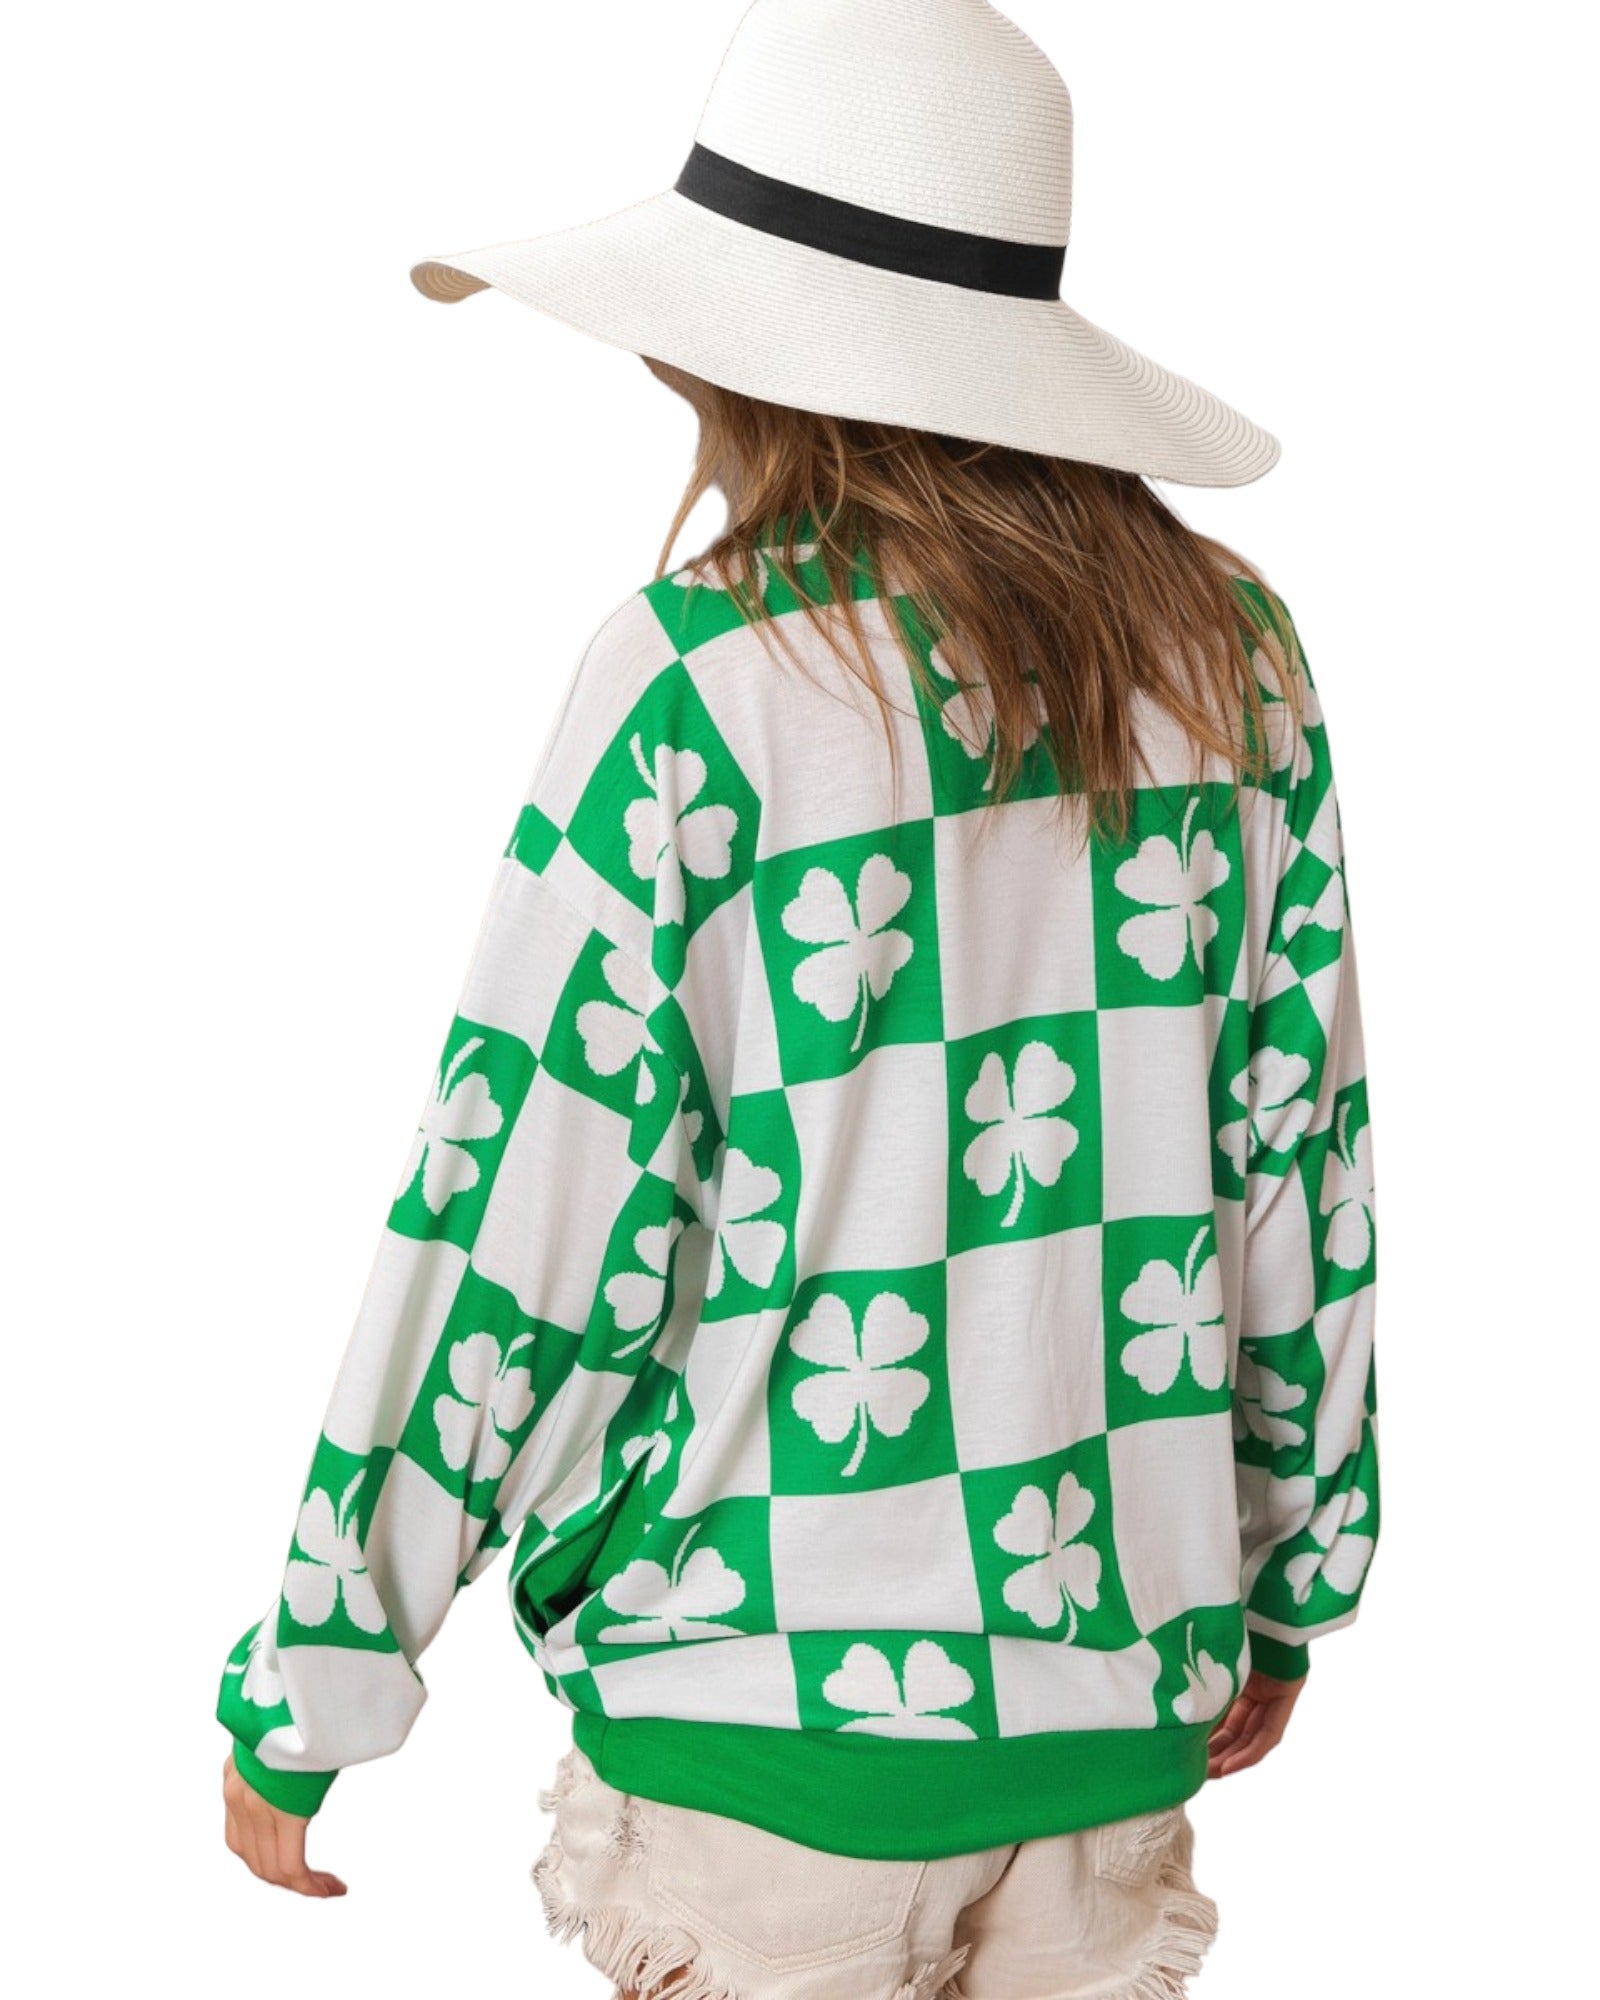 All The Luck Clover Tunic